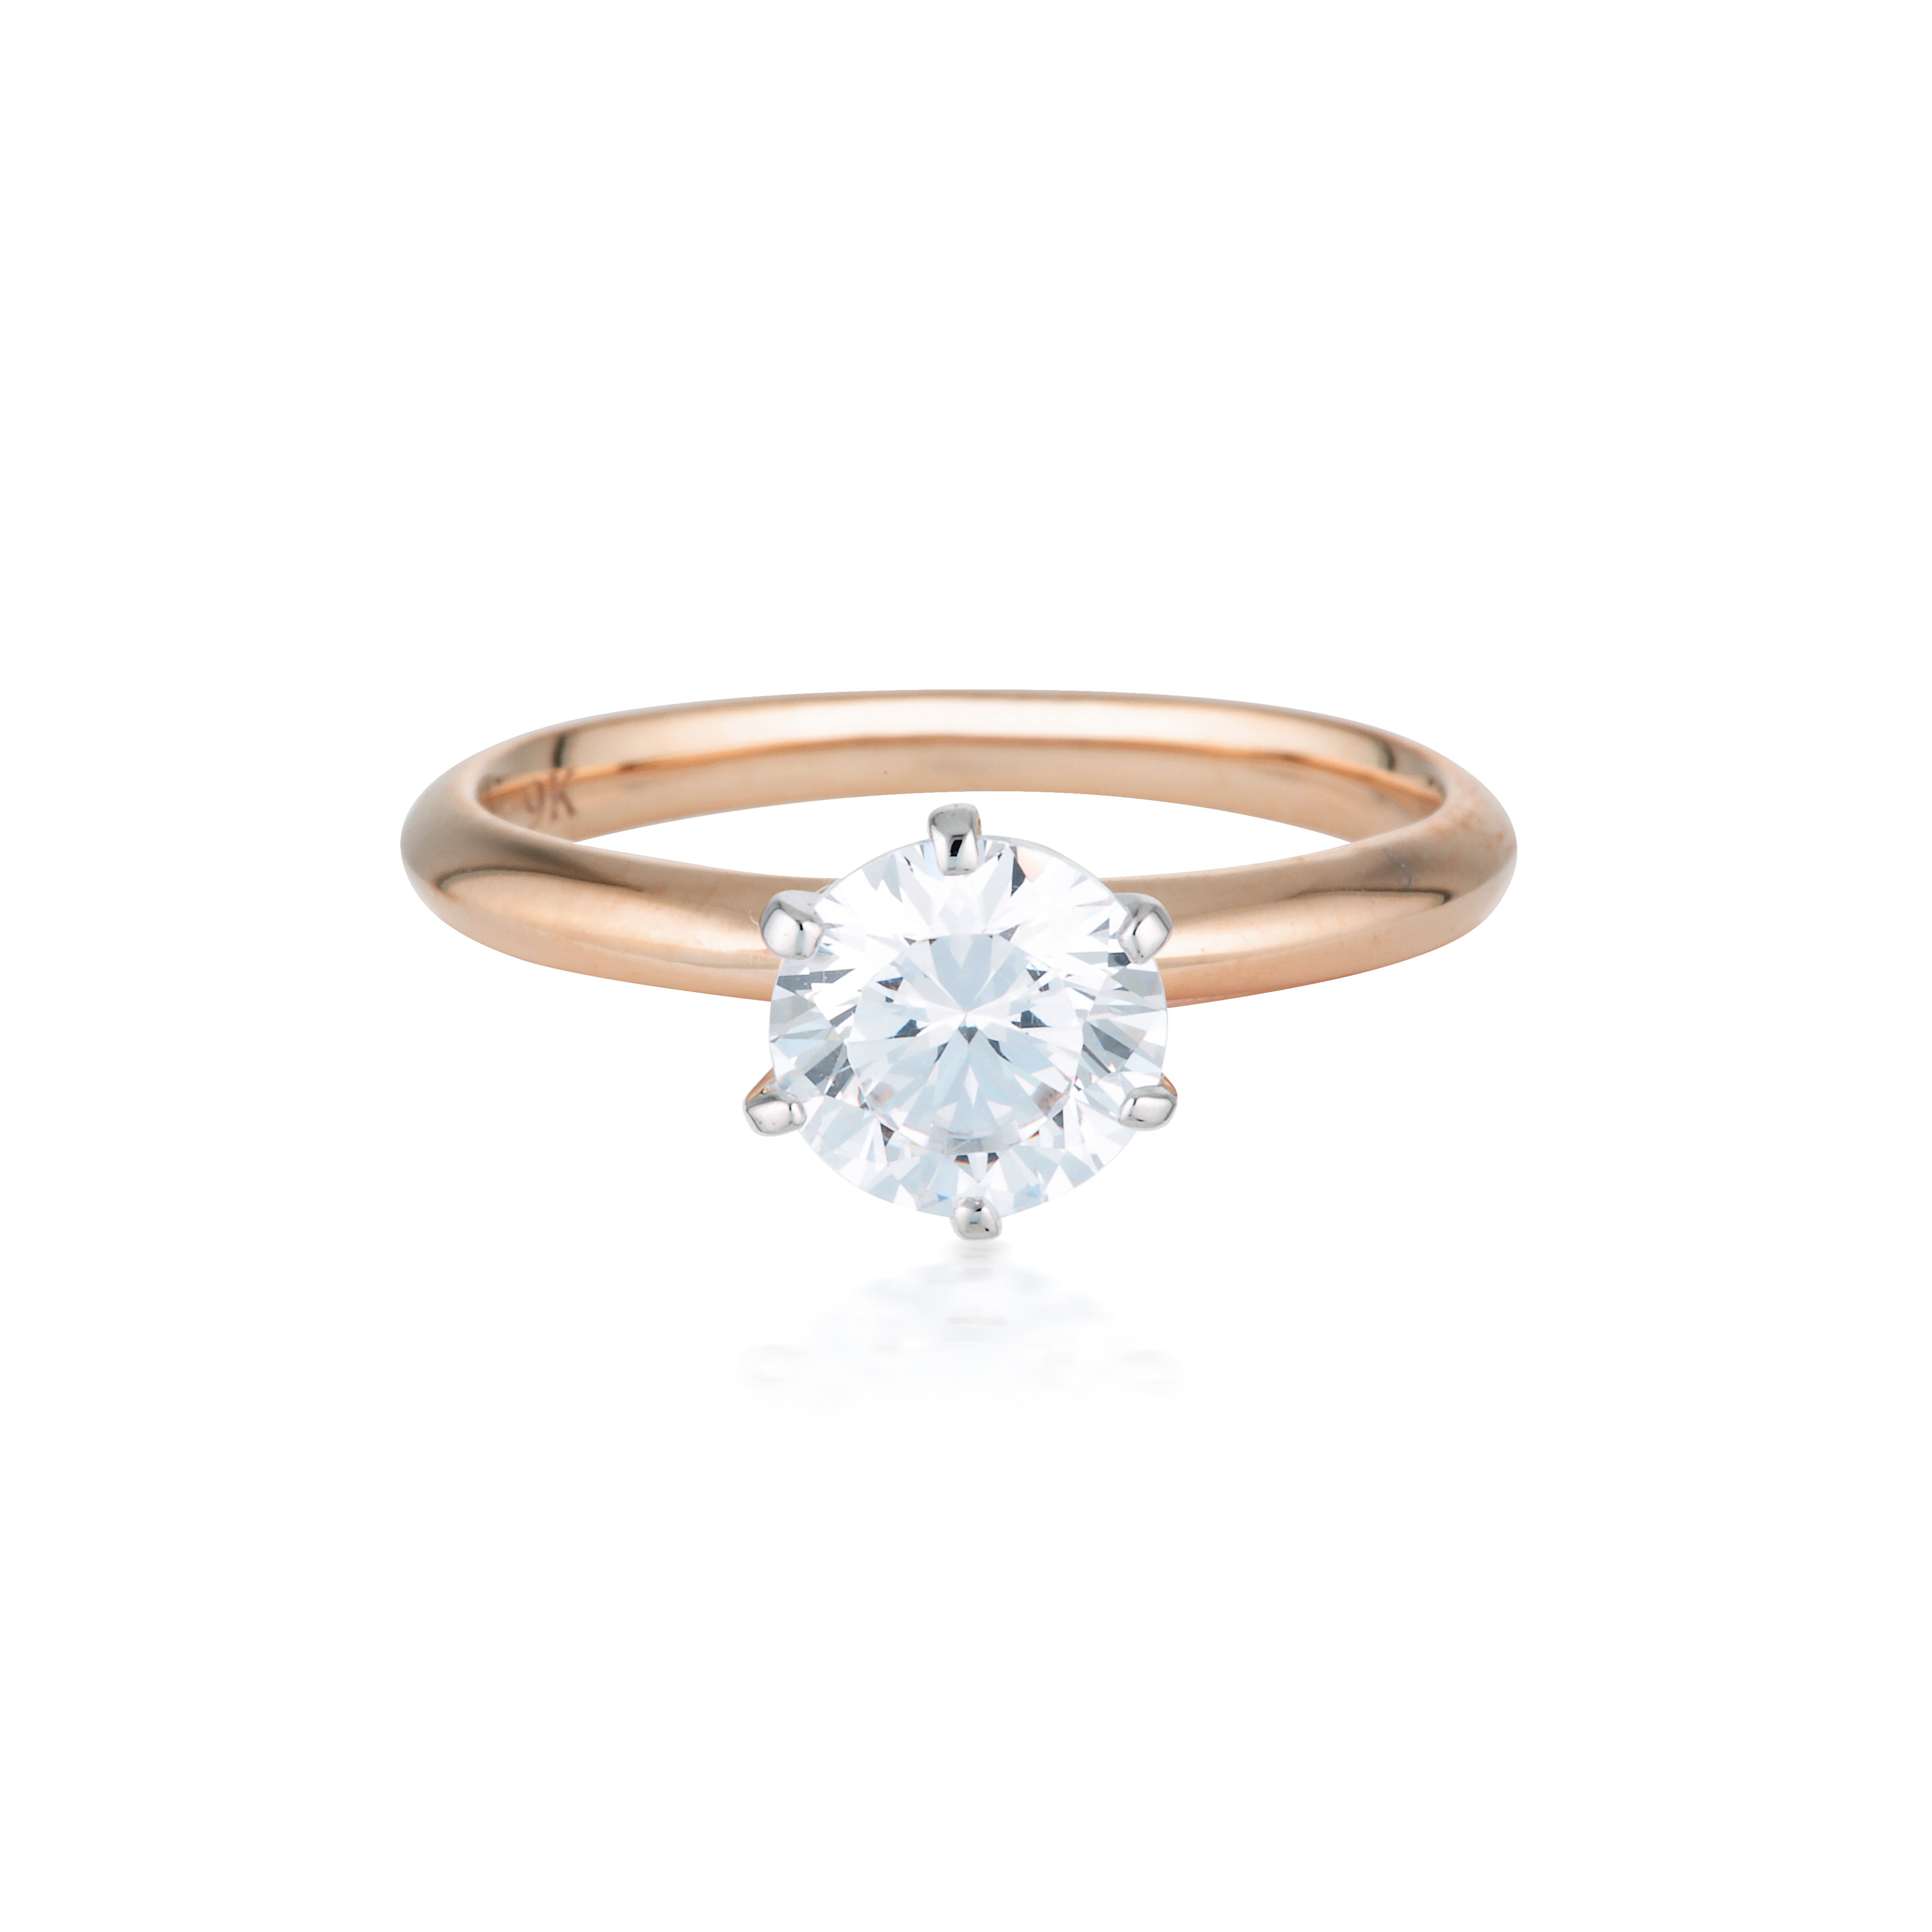 Georgini Gold Round Brilliant Cut 1.25tcw Moissanite Solitaire with Knife Edge Band in Rose Gold